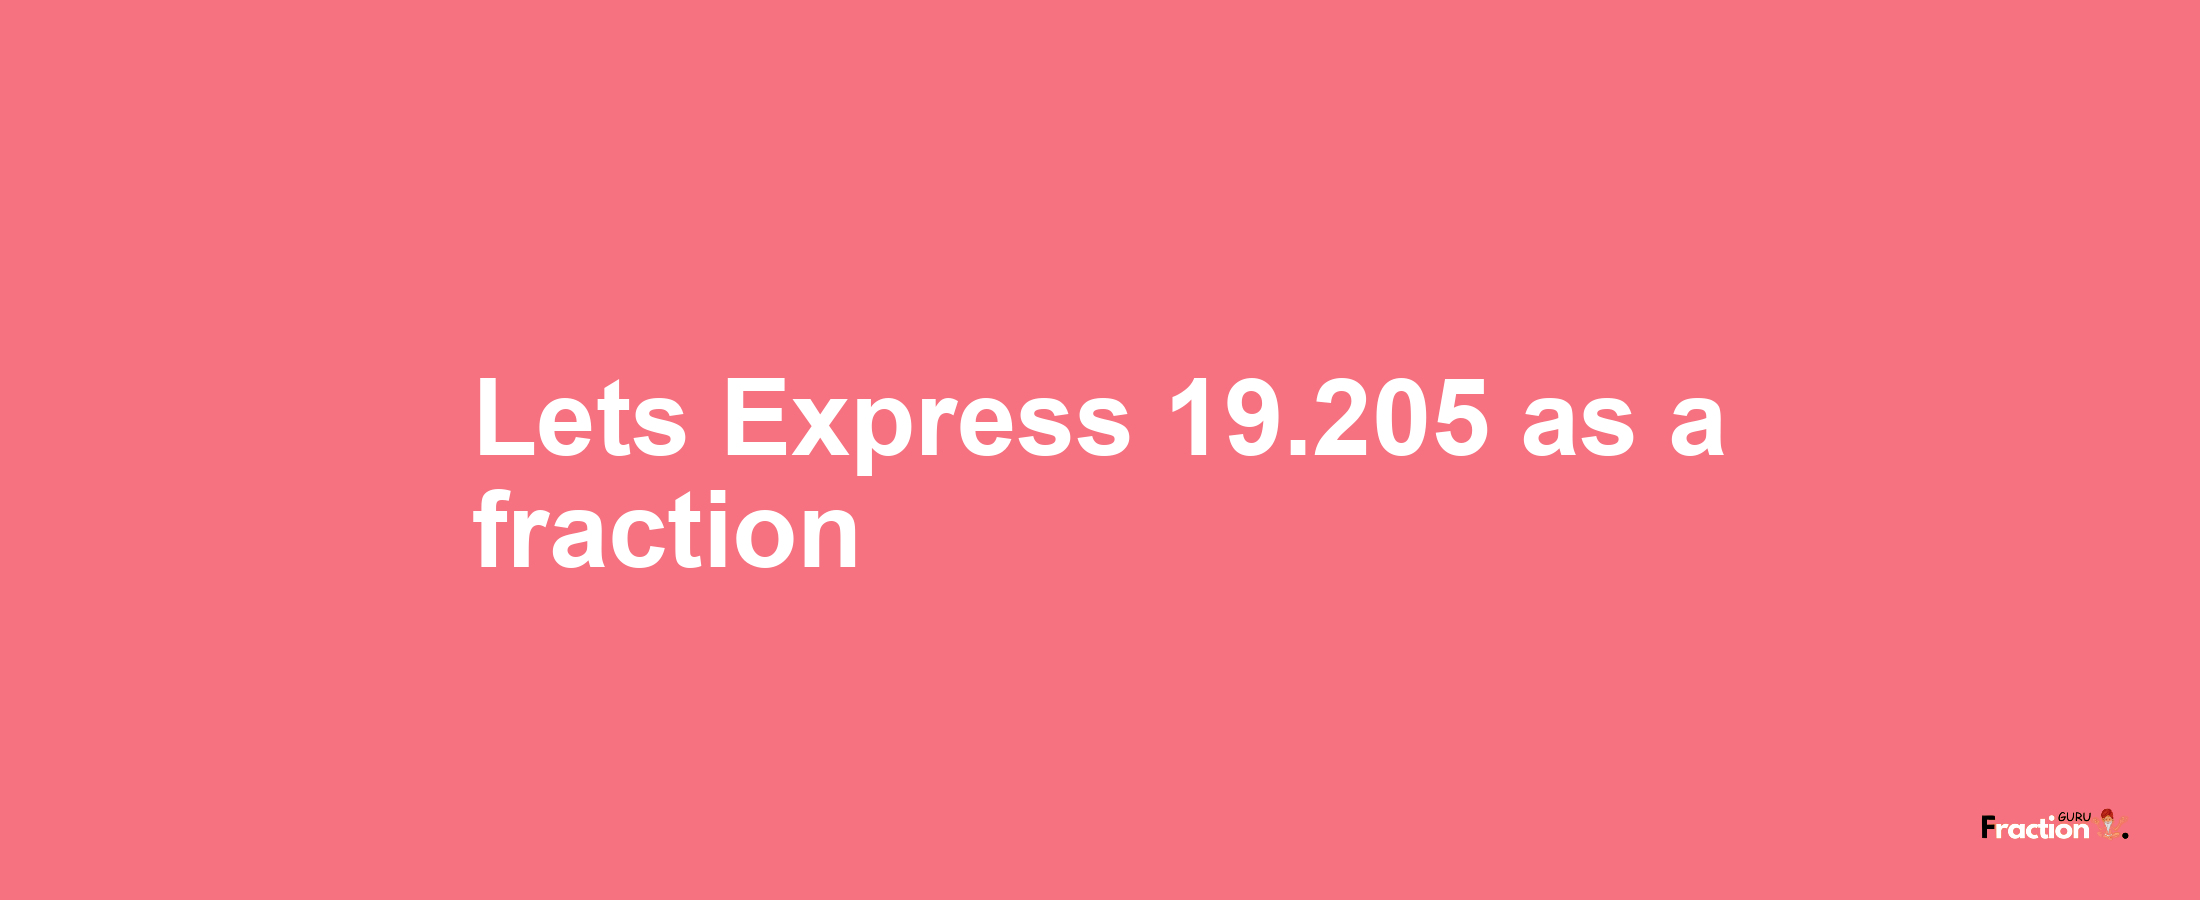 Lets Express 19.205 as afraction